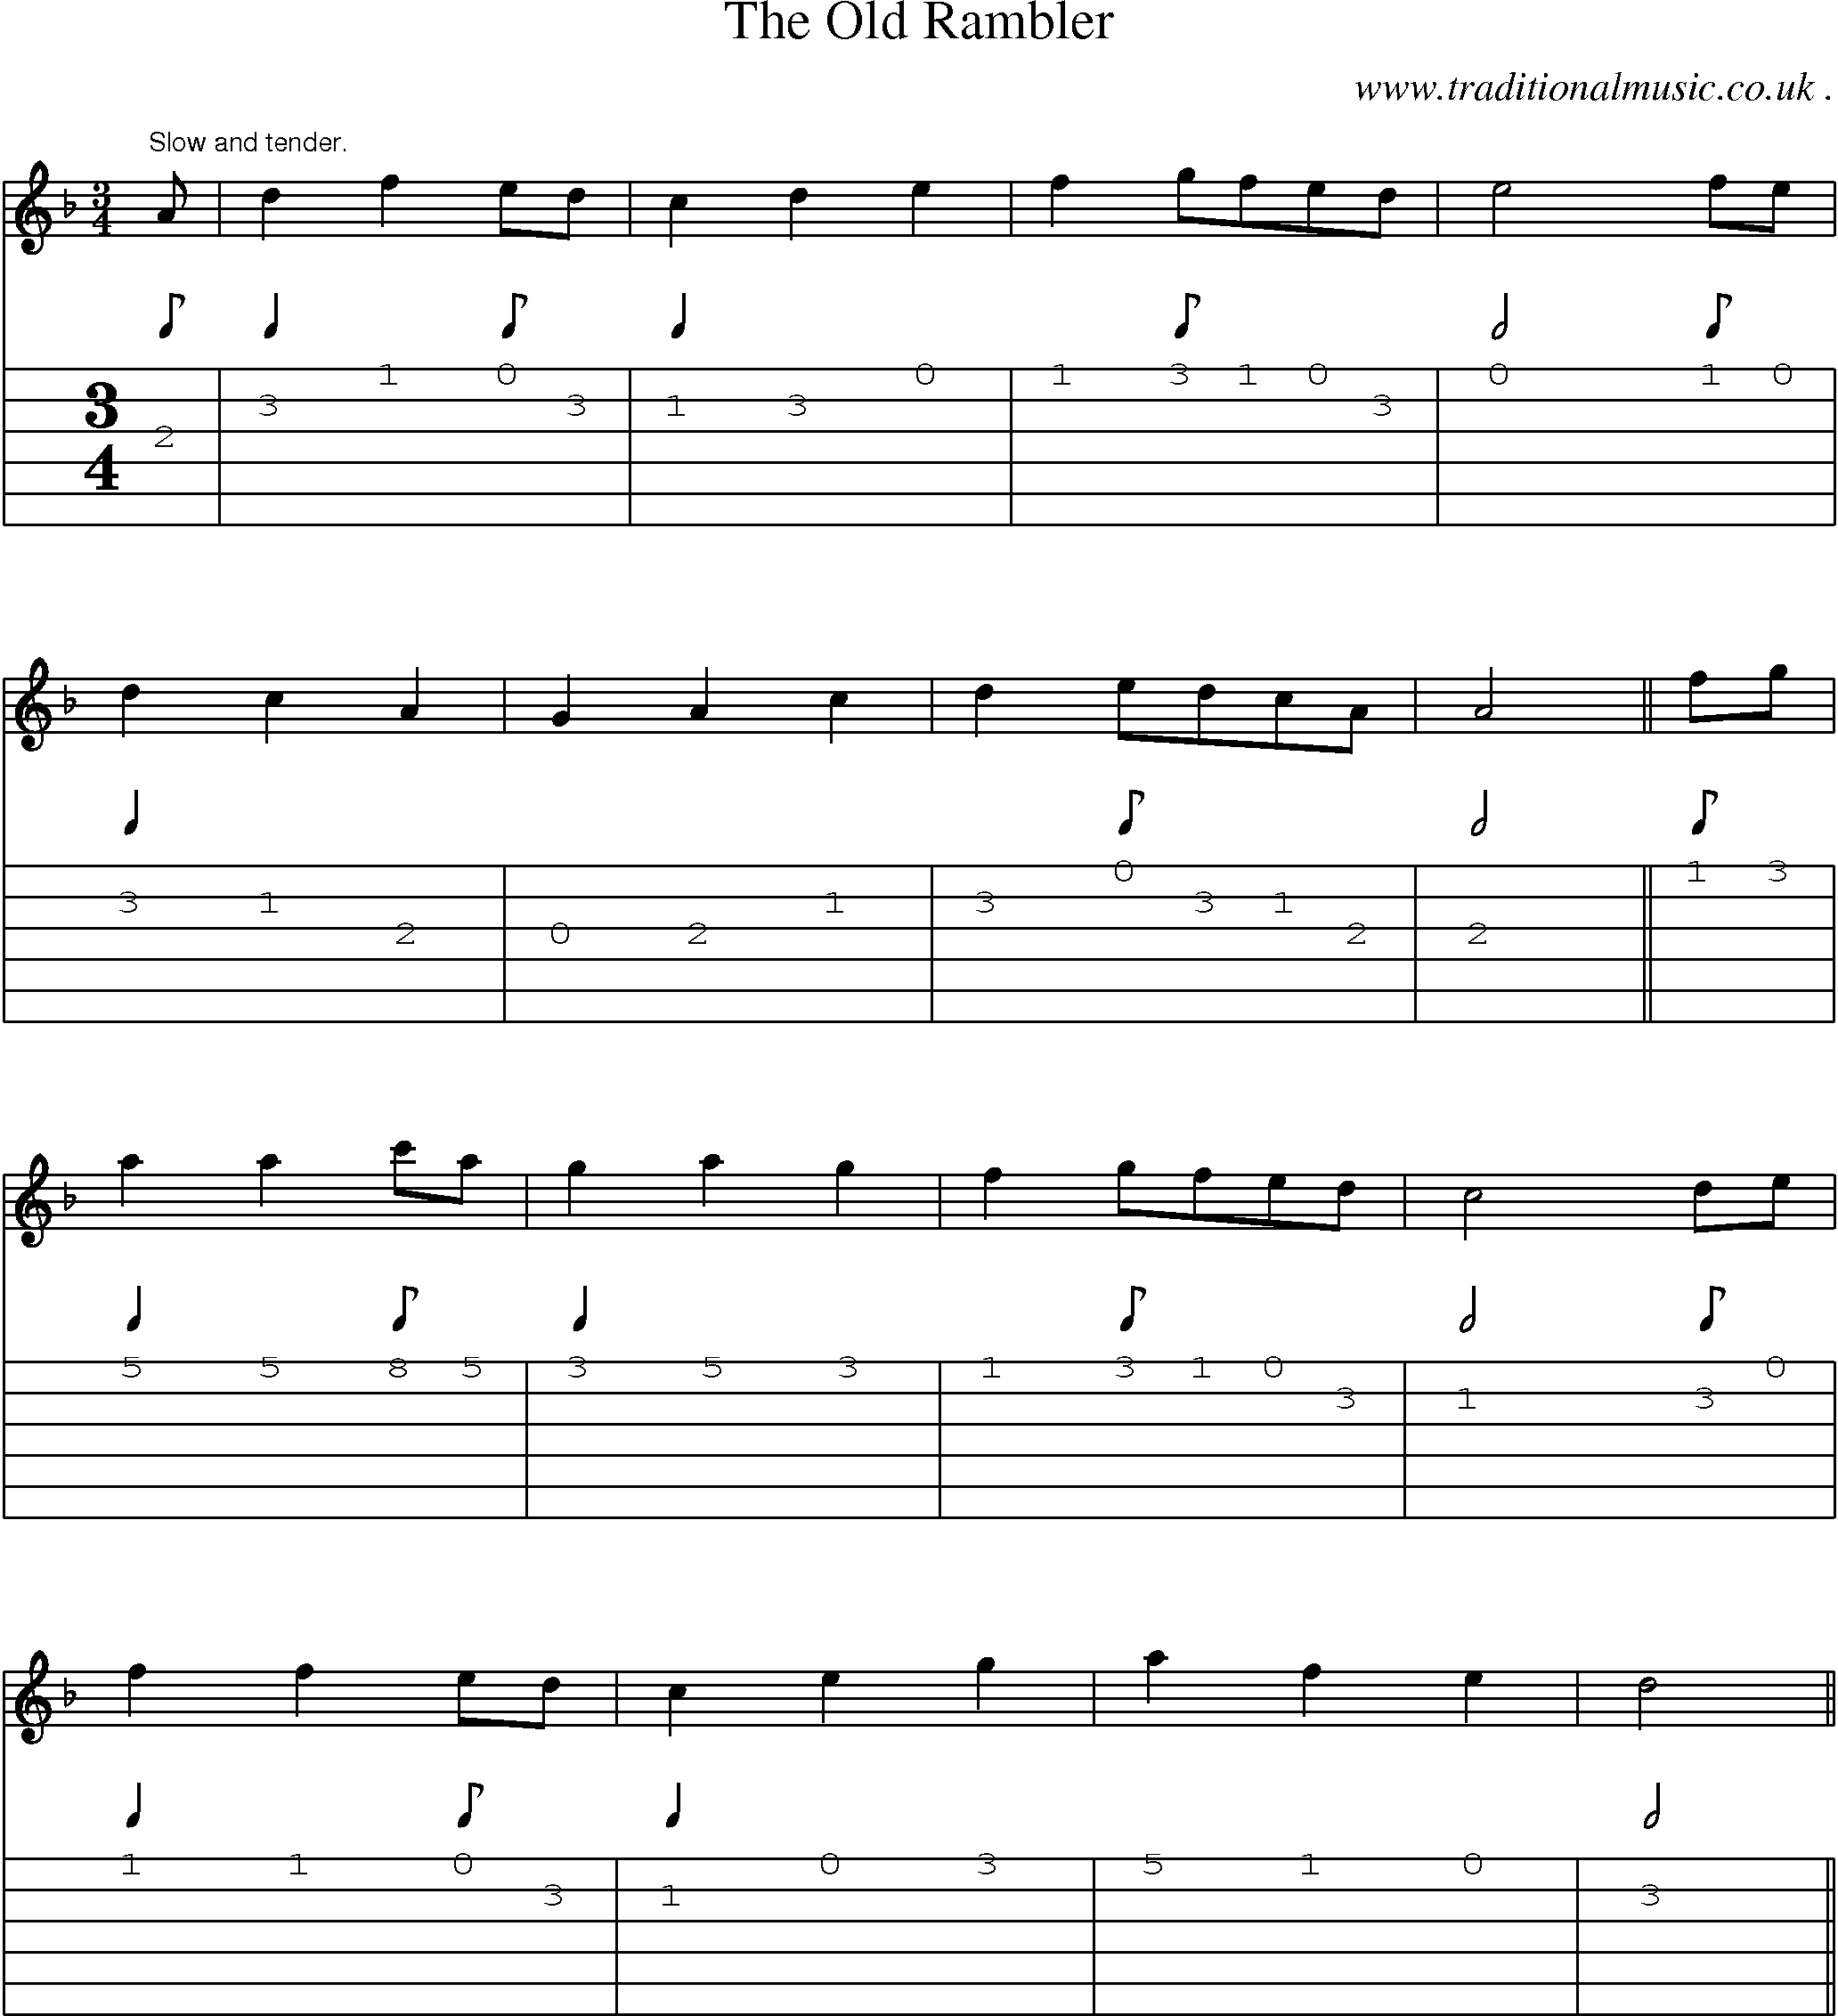 Sheet-Music and Guitar Tabs for The Old Rambler